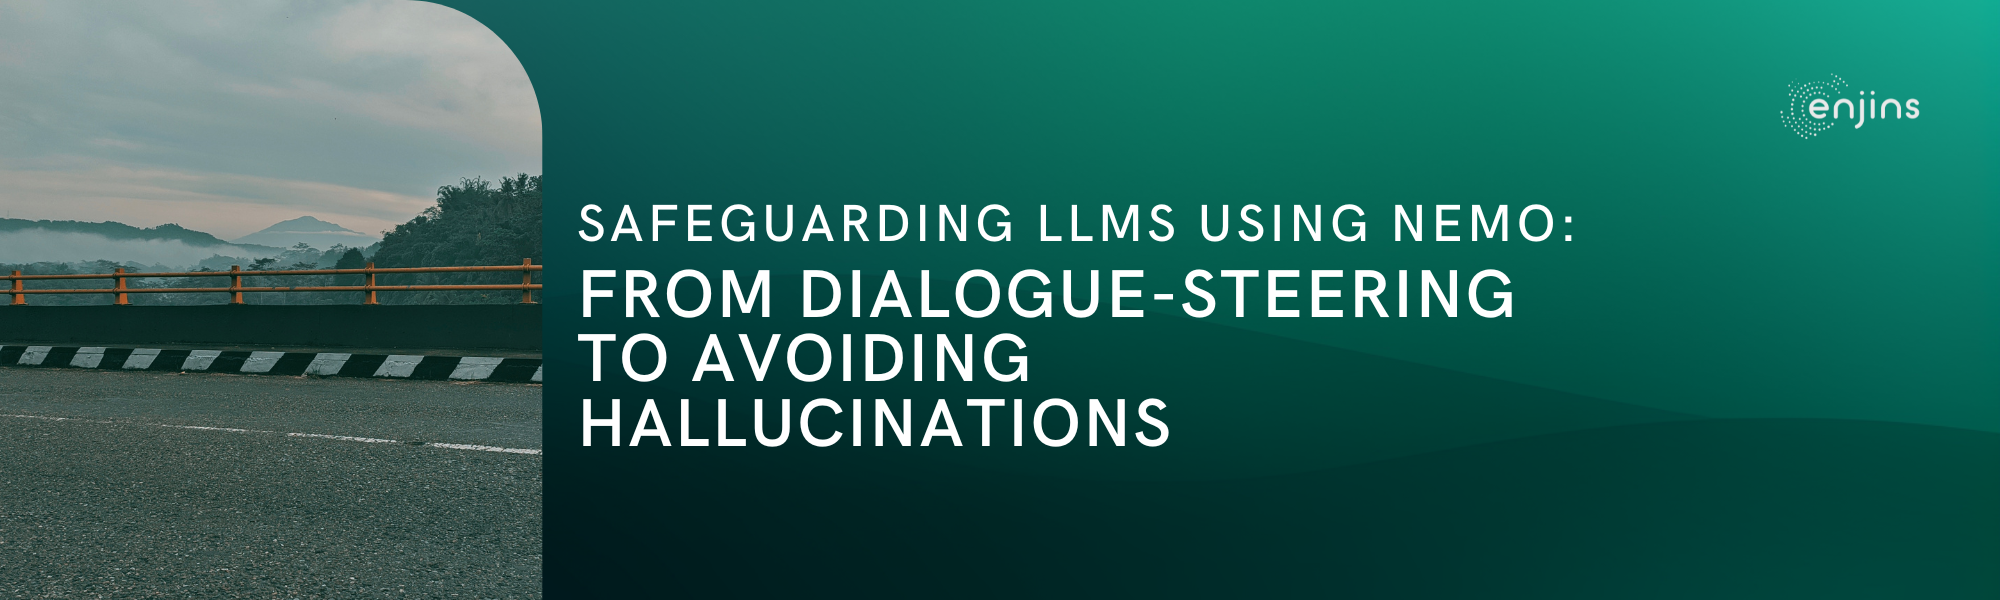 Safeguarding LLMs using NeMo: from dialogue-steering to avoiding hallucinations